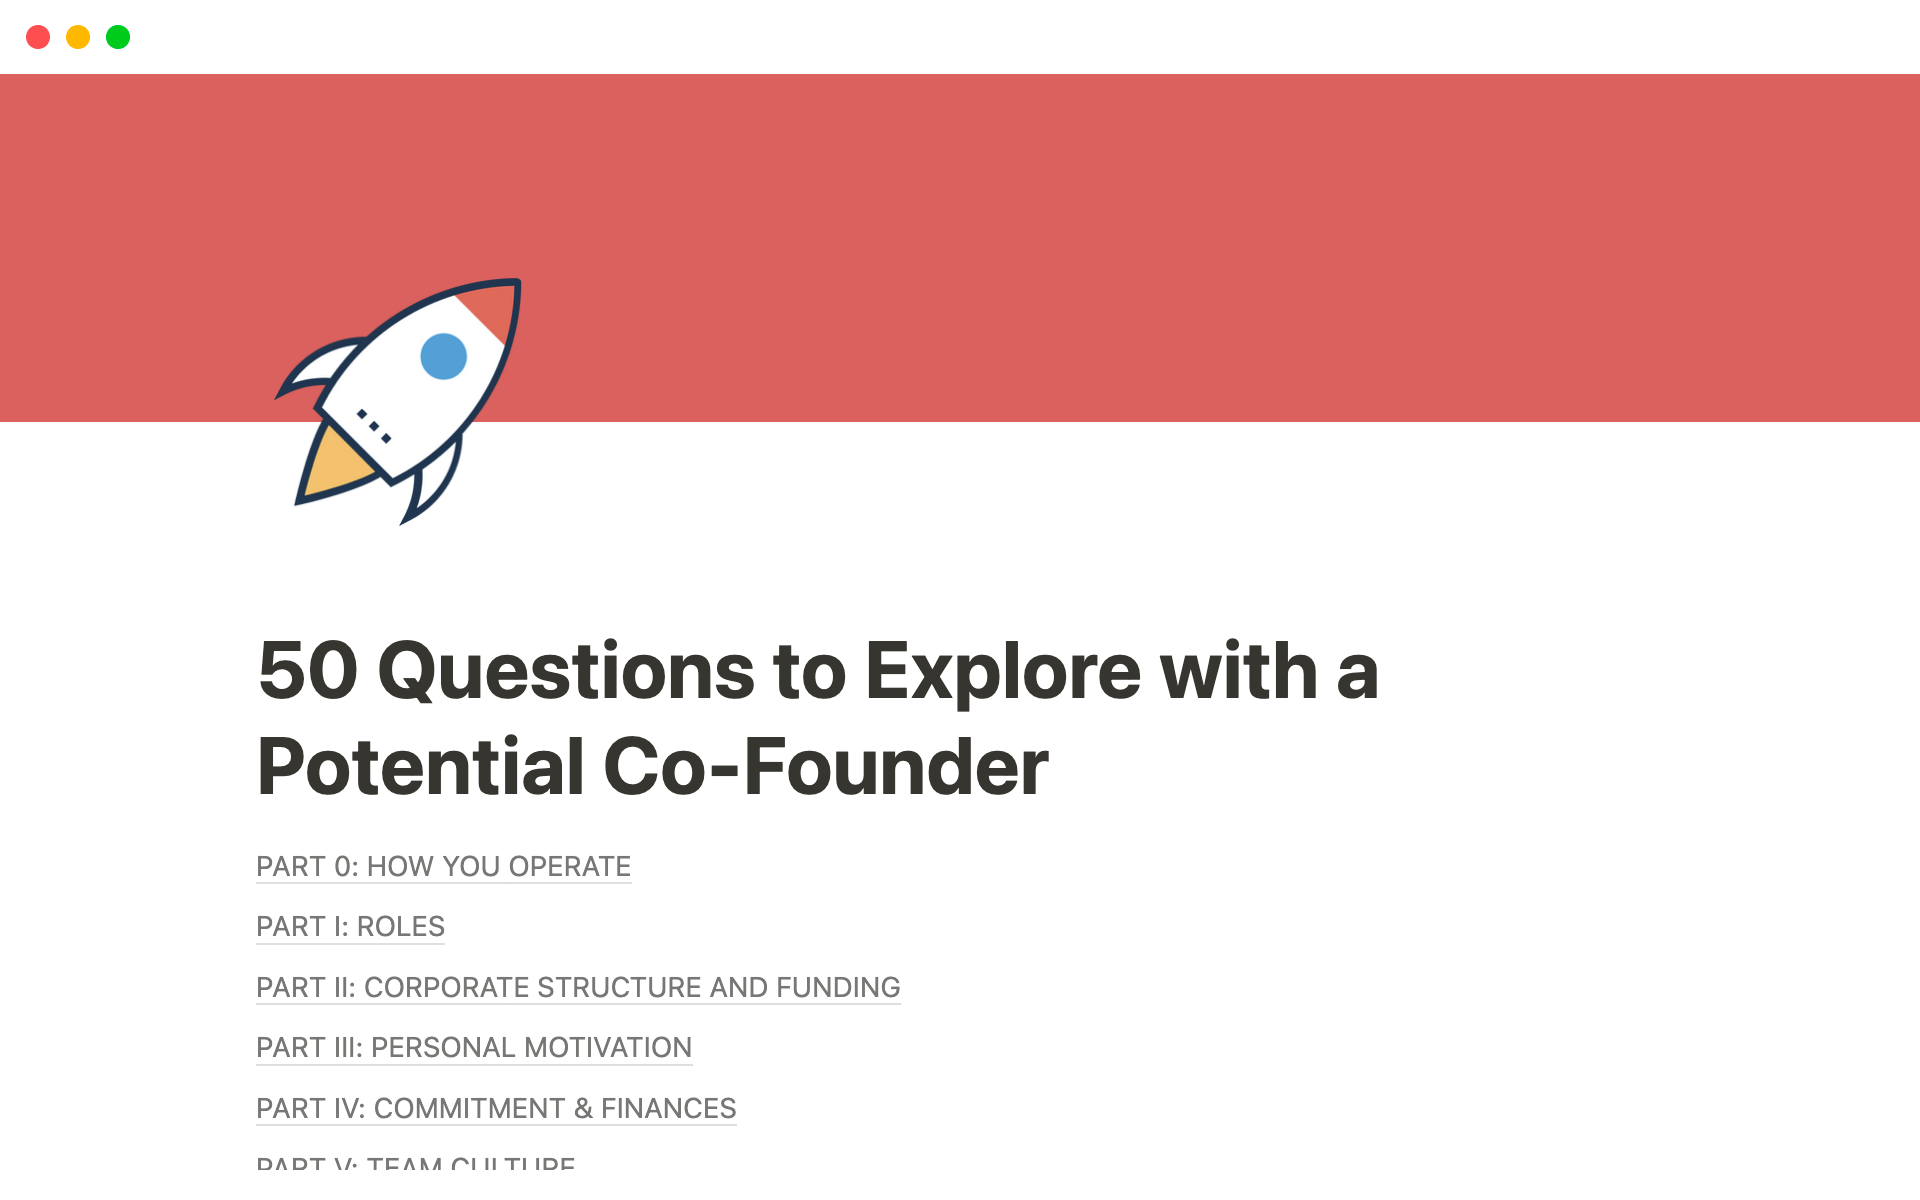 50 Questions to Explore with a Potential Co-Founder님의 템플릿 미리보기